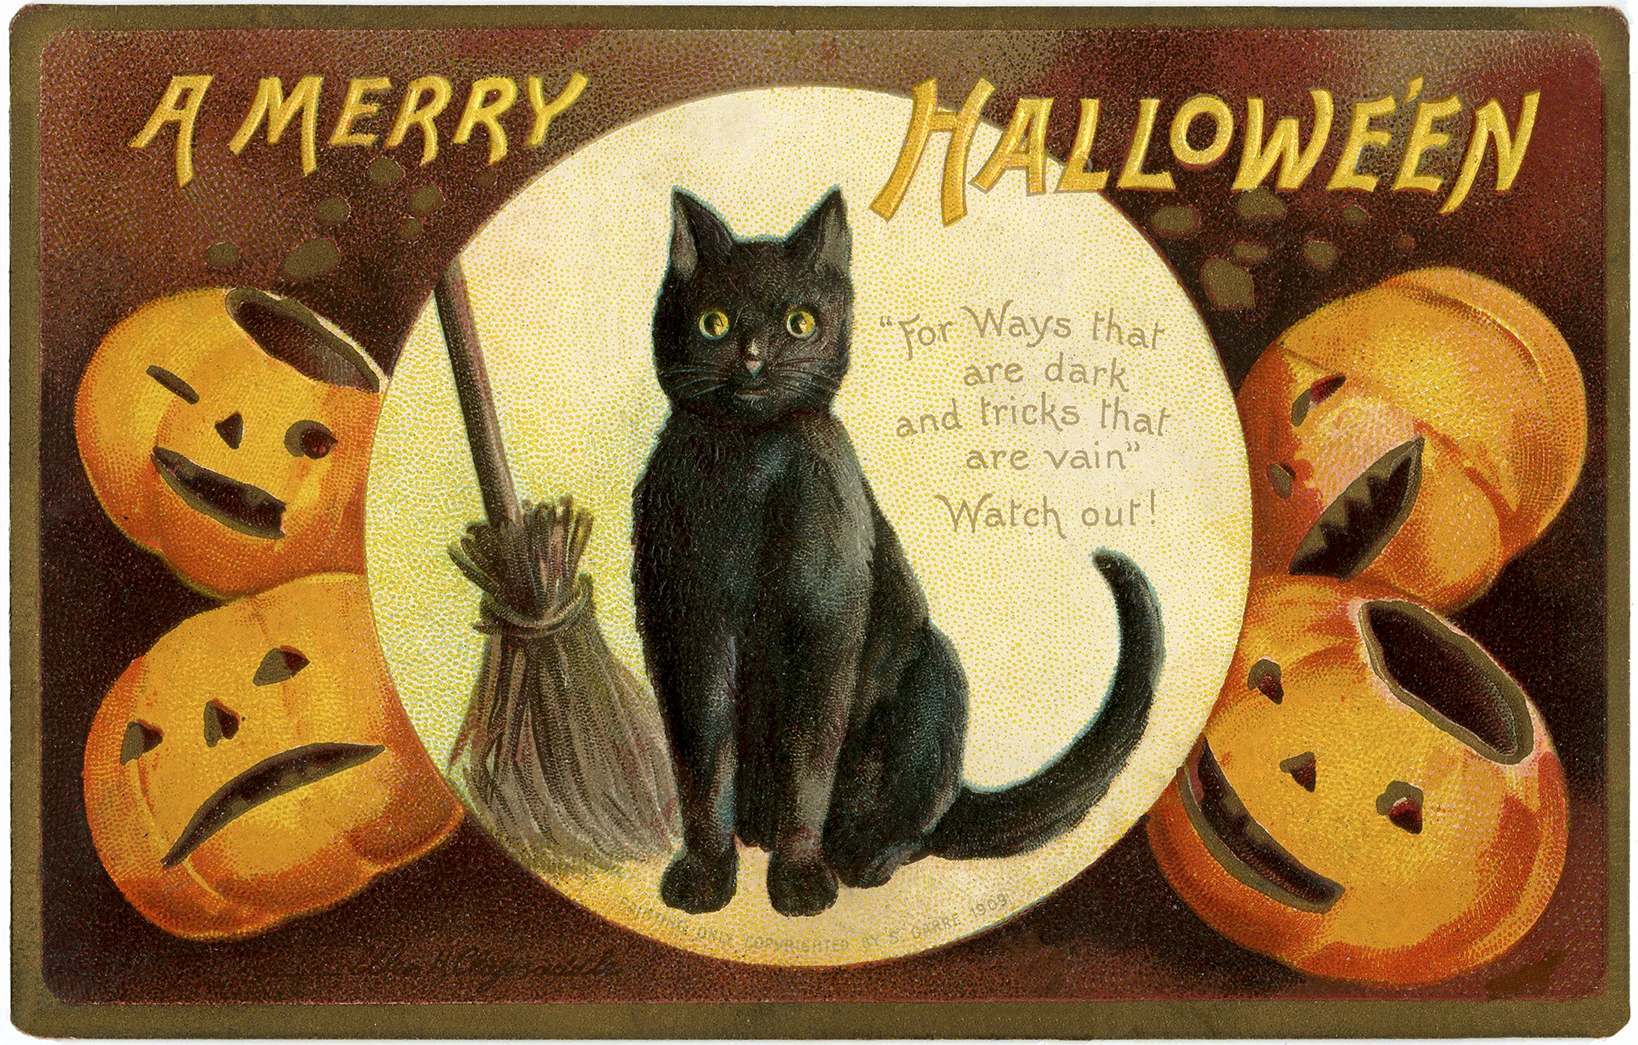 24 Vintage Halloween Cards That Are Nostalgic — But a Bit Creepy, Too